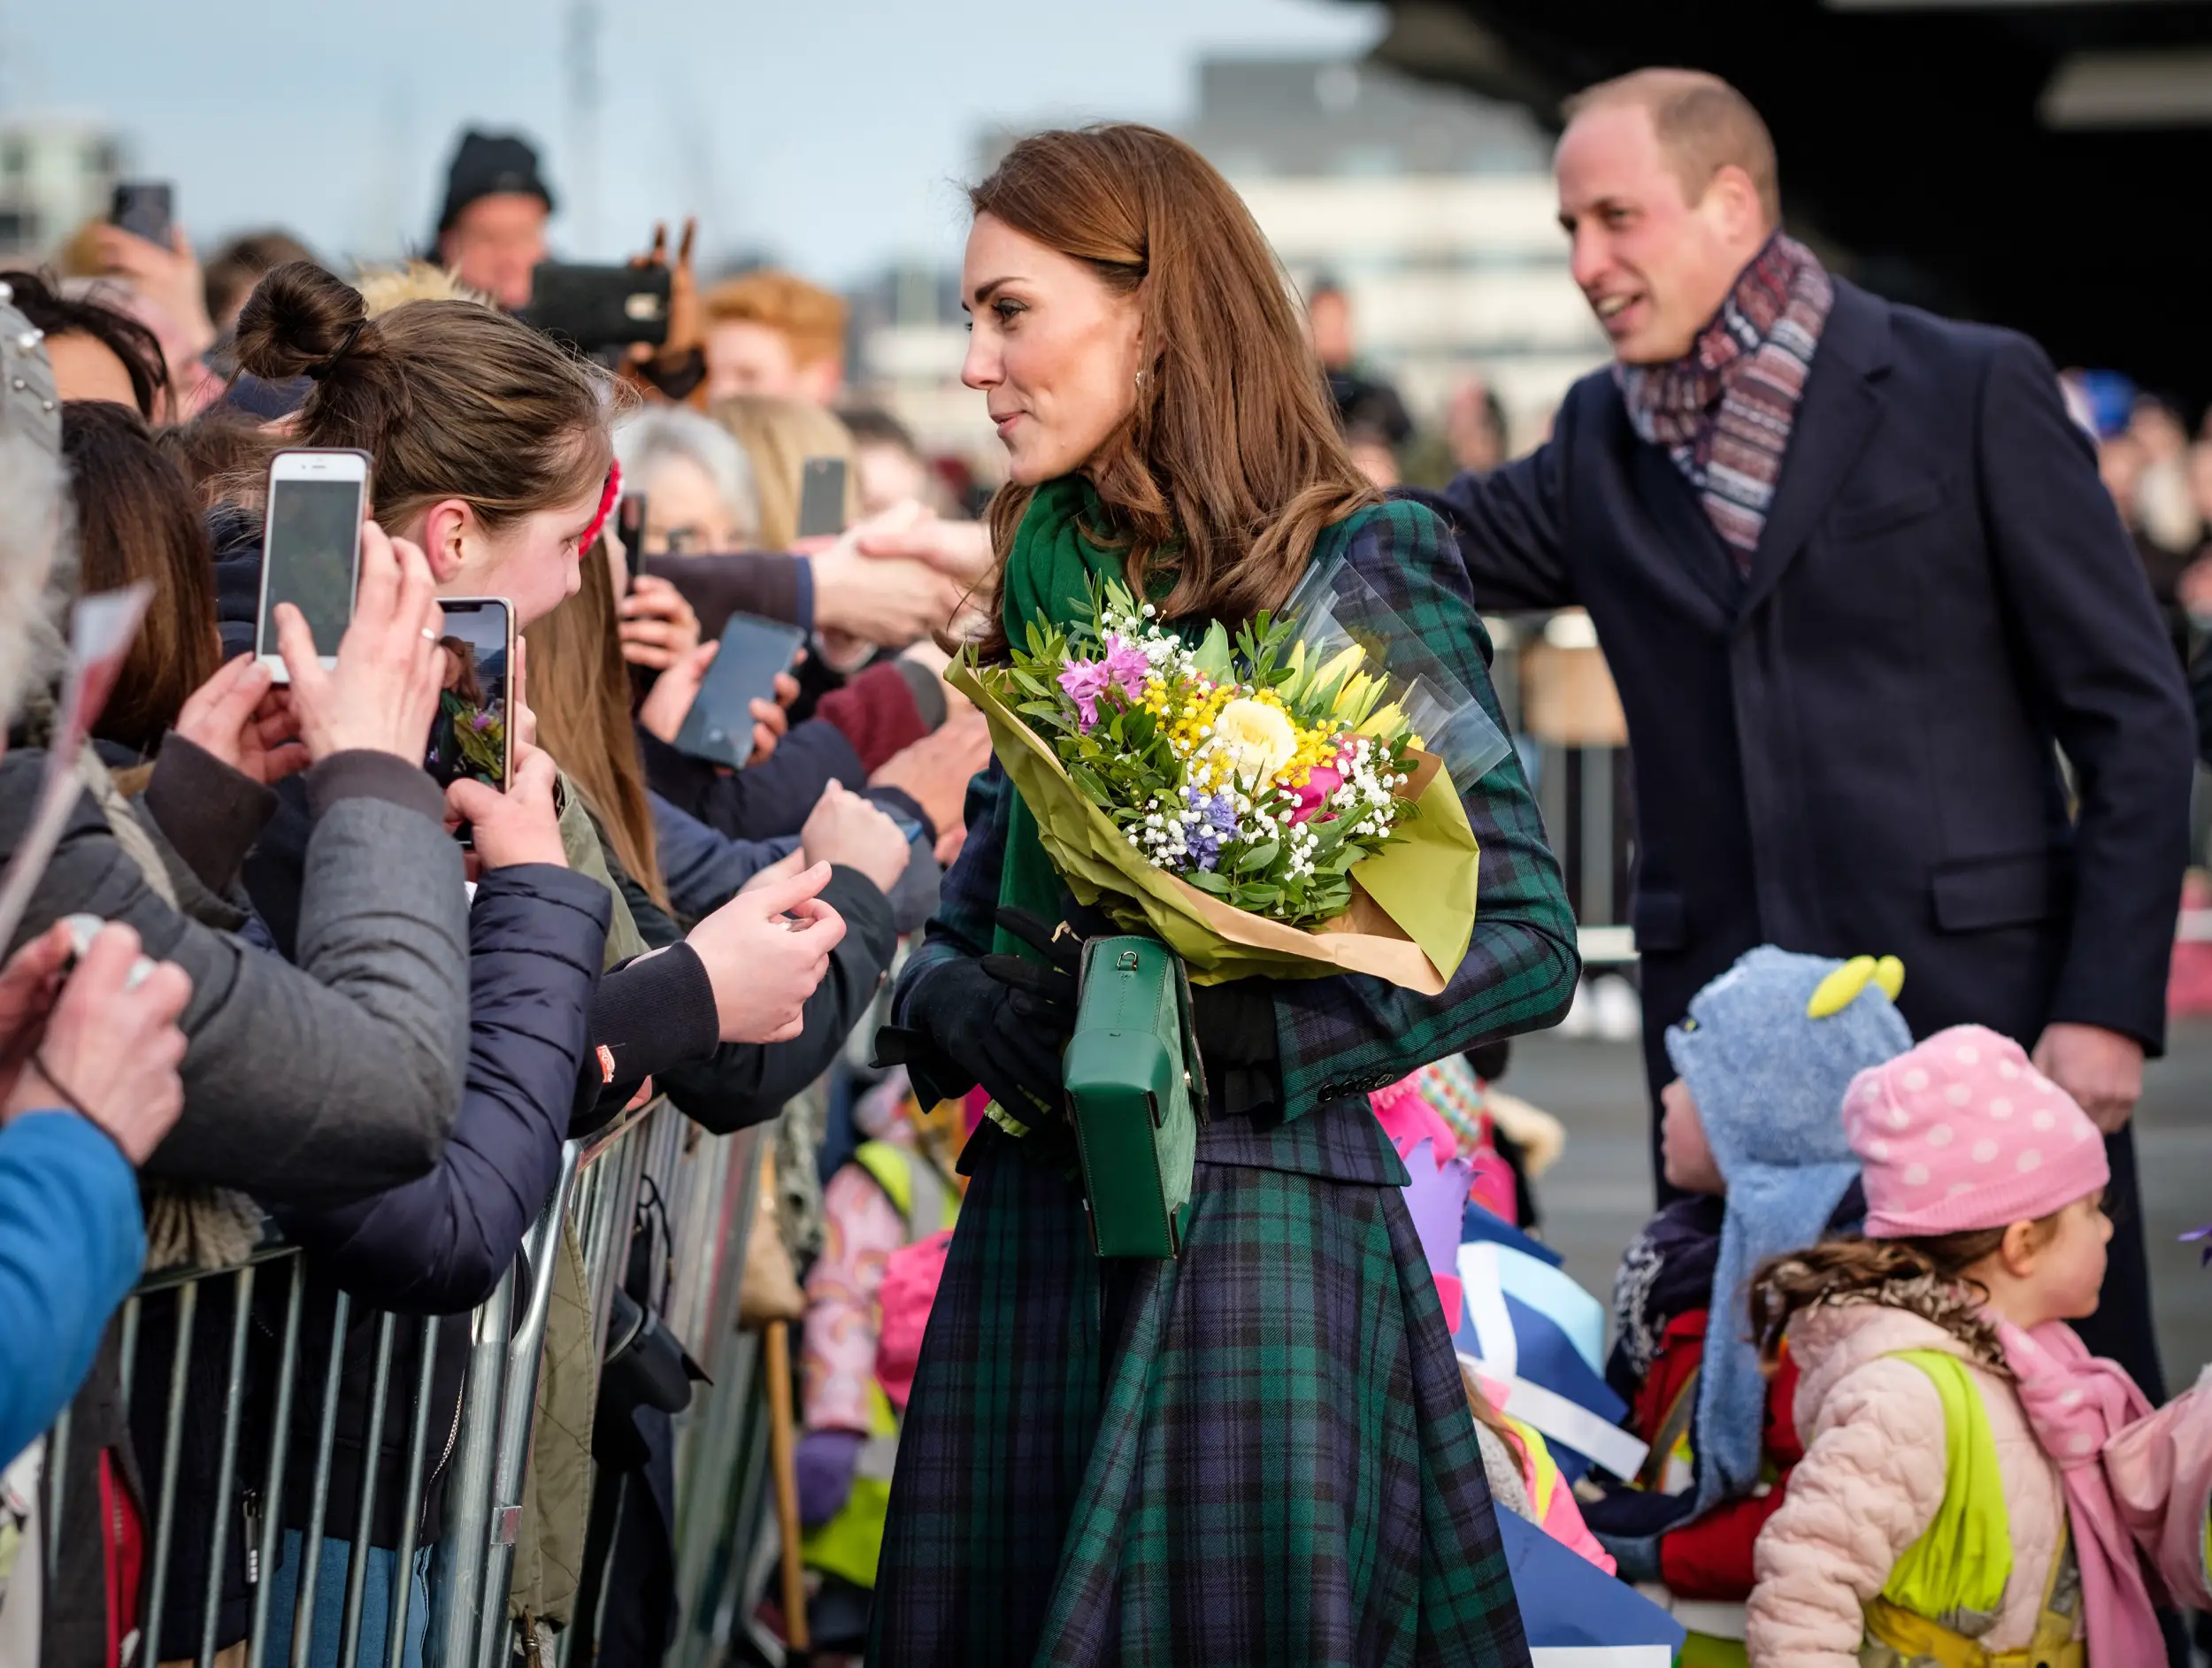 The Duke and Duchess of Cambridge are embarking on Nation wide Royal Train Tour